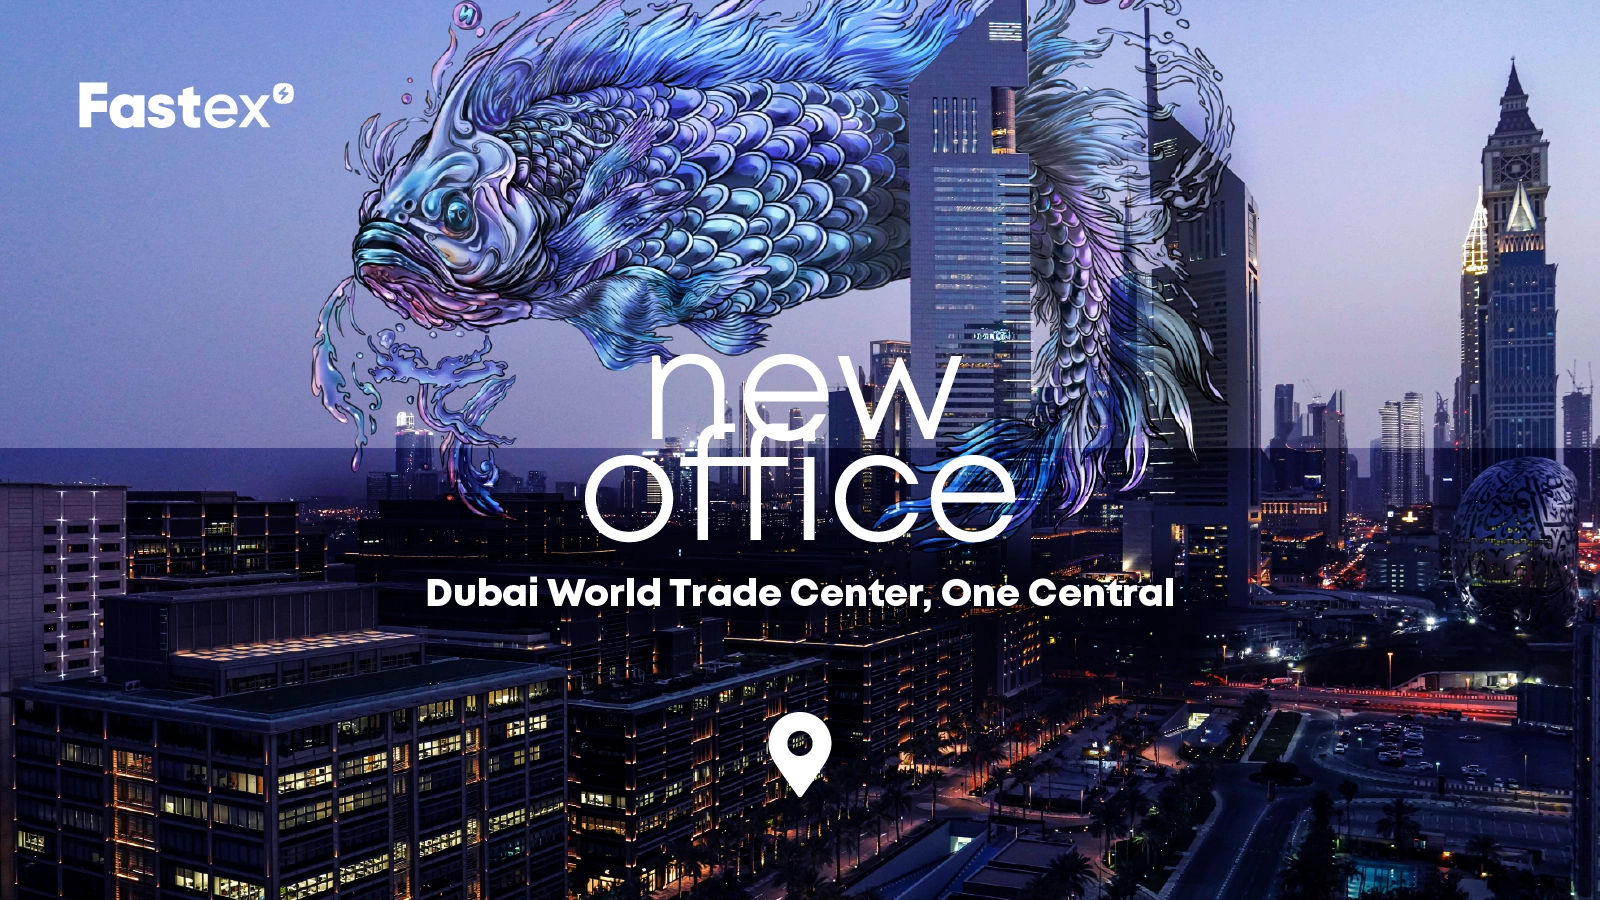 Fastex Announces the Opening of Its New Office at Dubai World Trade Center's One Central